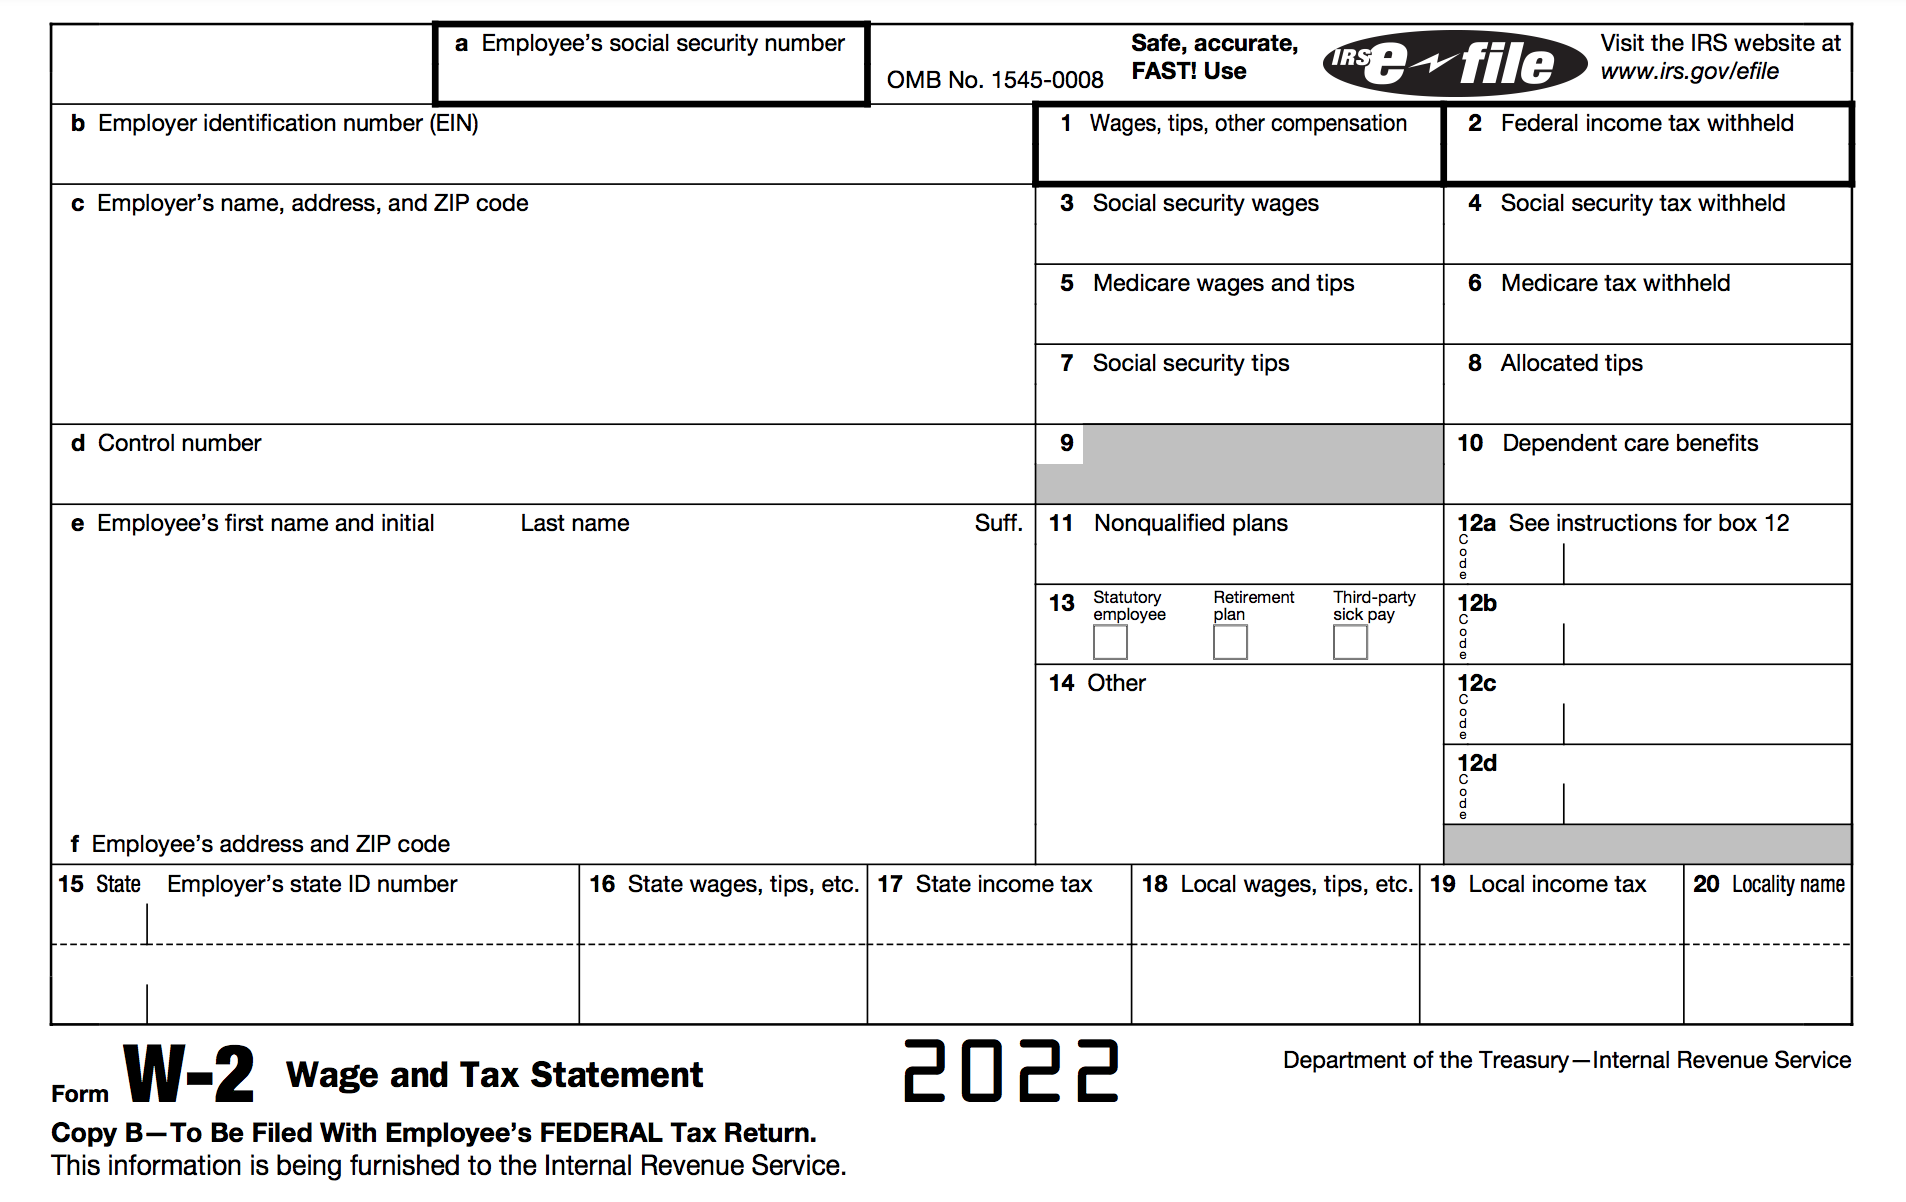 How To Fill Out A W-2 Tax Form | Smartasset throughout W2 Ez Form